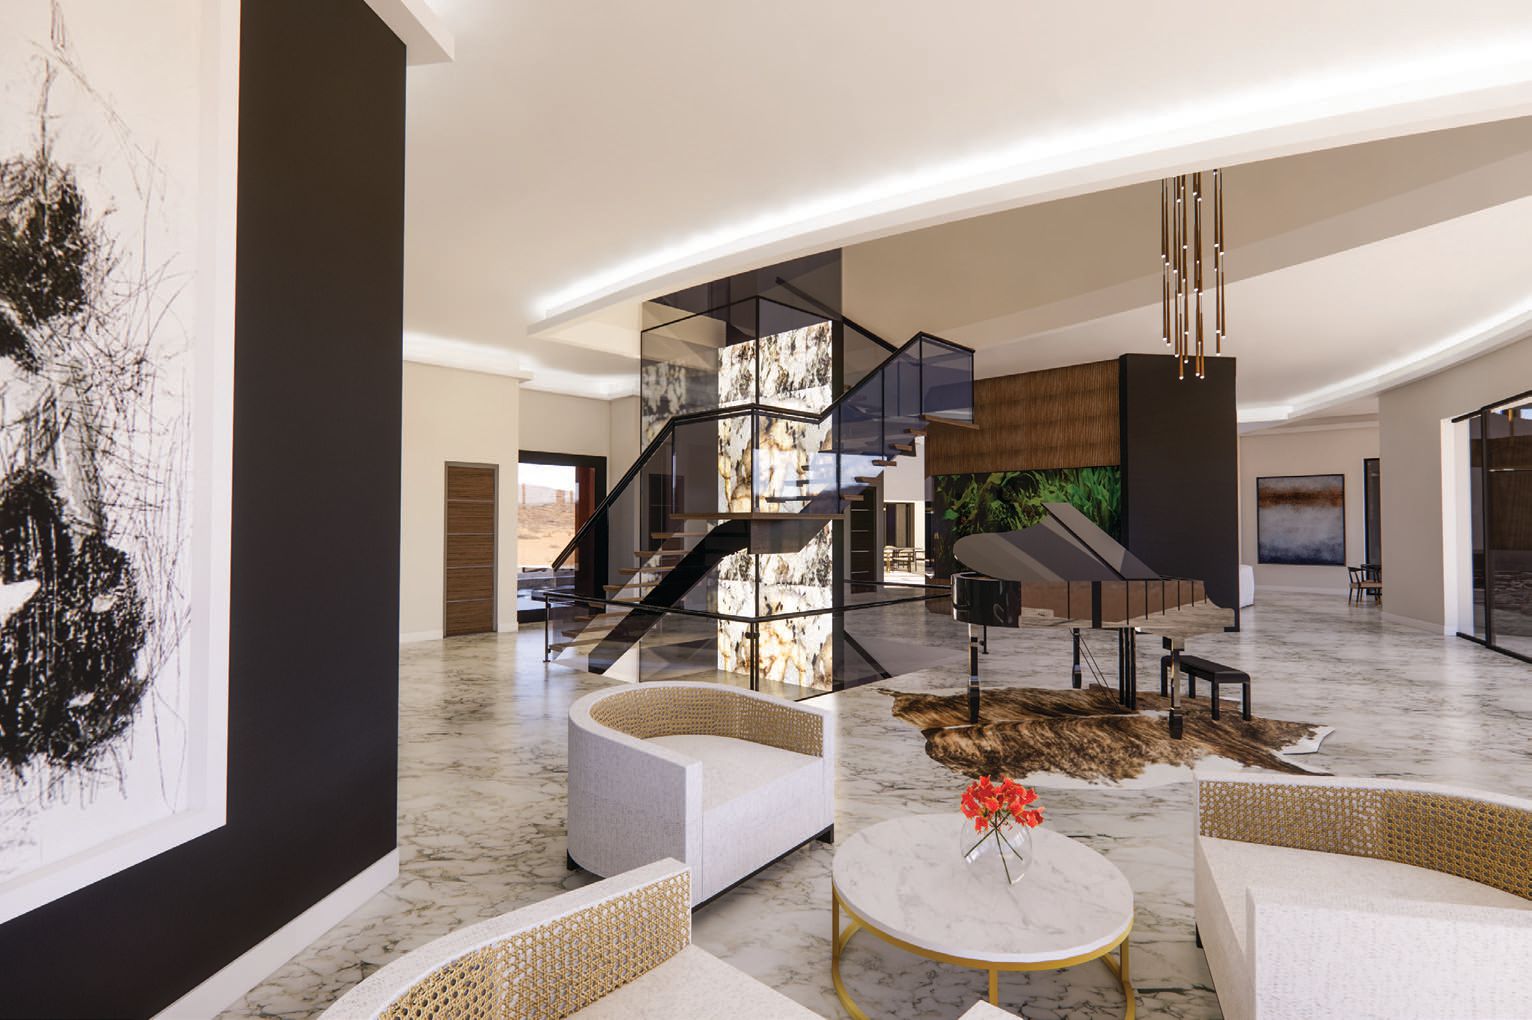 Terra Firma Development’s endless design possibilties ensure your home is truly you, from focal-point staircases to luxurious lounge areas. RENDERINGS BY DIERDRE GADDY, PRINCIPLE INTERIOR DESIGNER, AND NICOLE VALDEZ, INTERIOR DESIGNER, OF TERRA FIRMA DEVELOPMENT